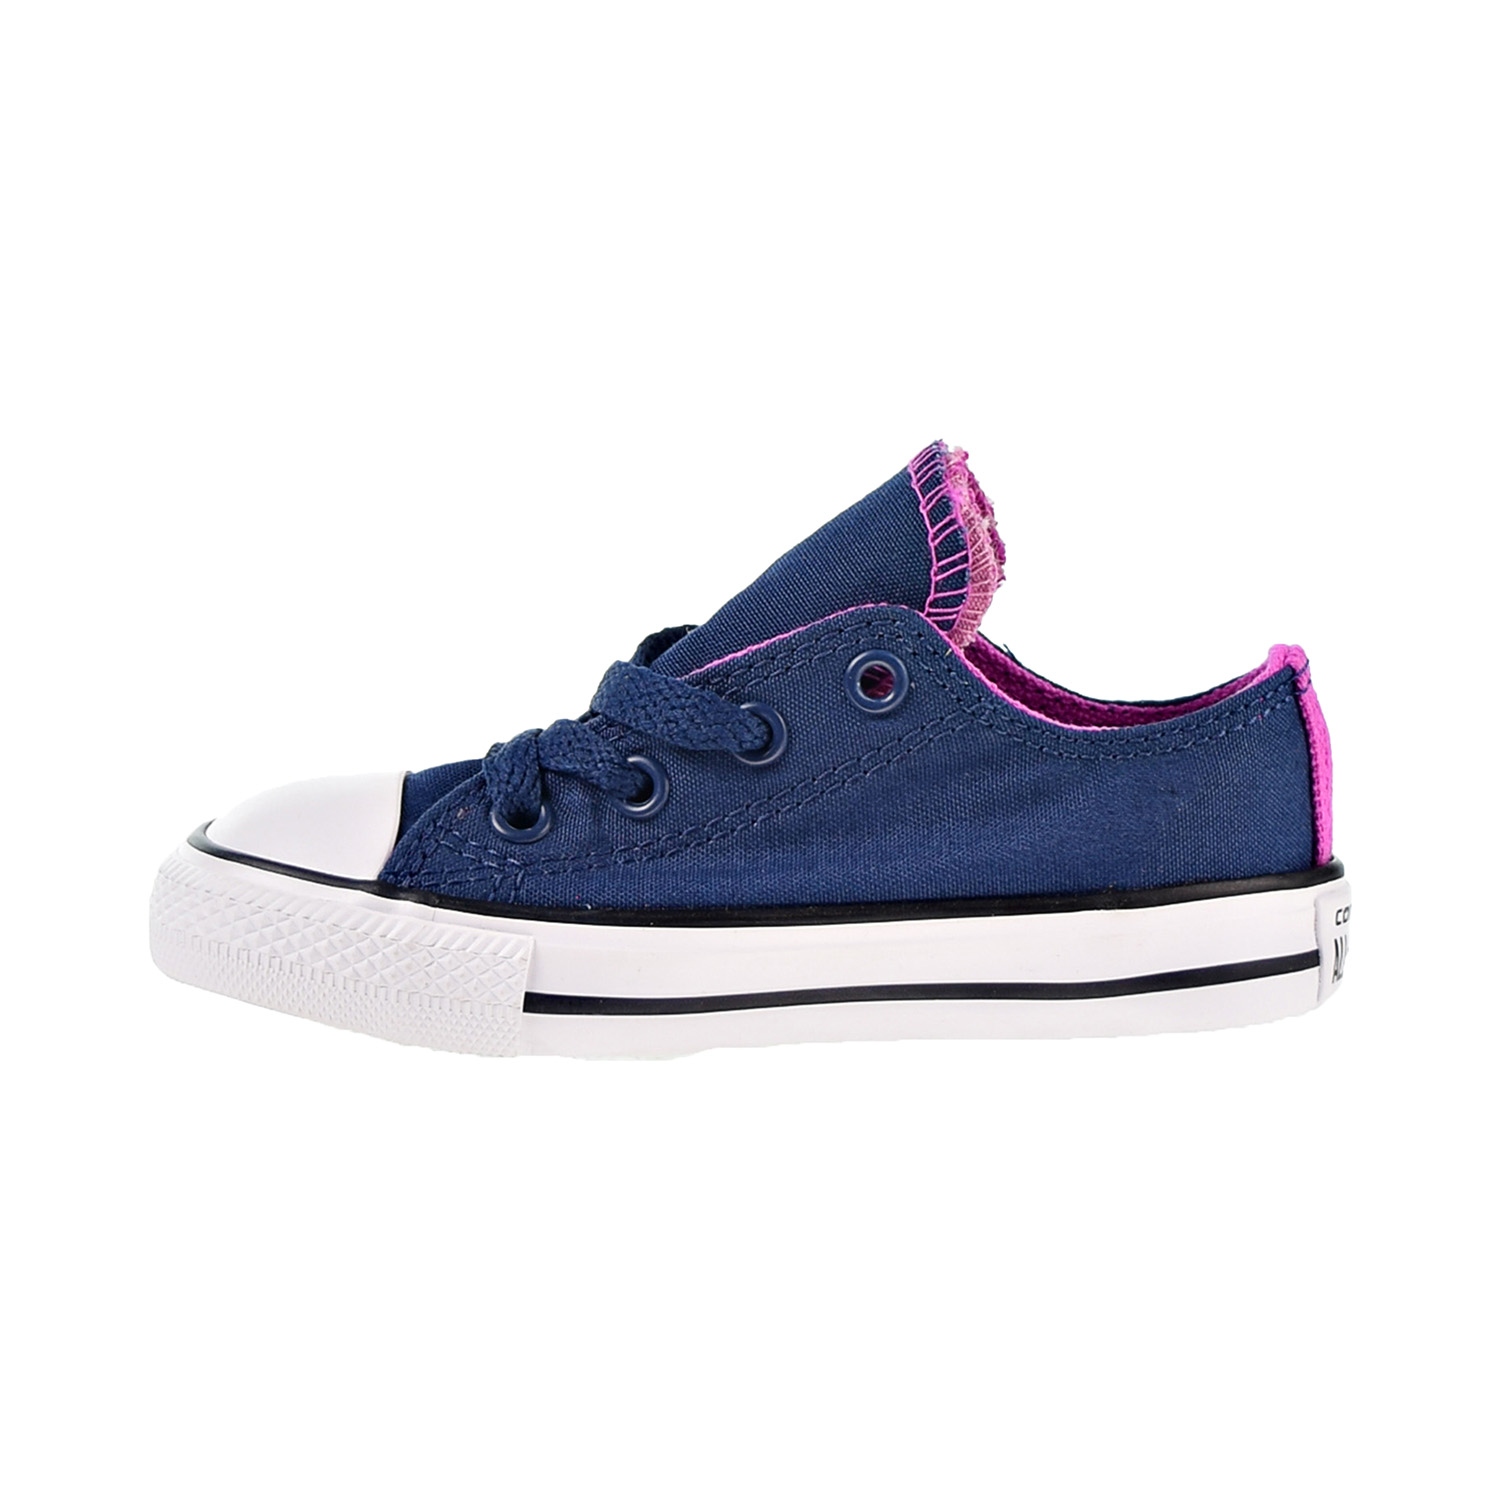 Converse Chuck Taylor All Star Double Toddler OX Toddler's Shoes Navy 760001f - image 4 of 6